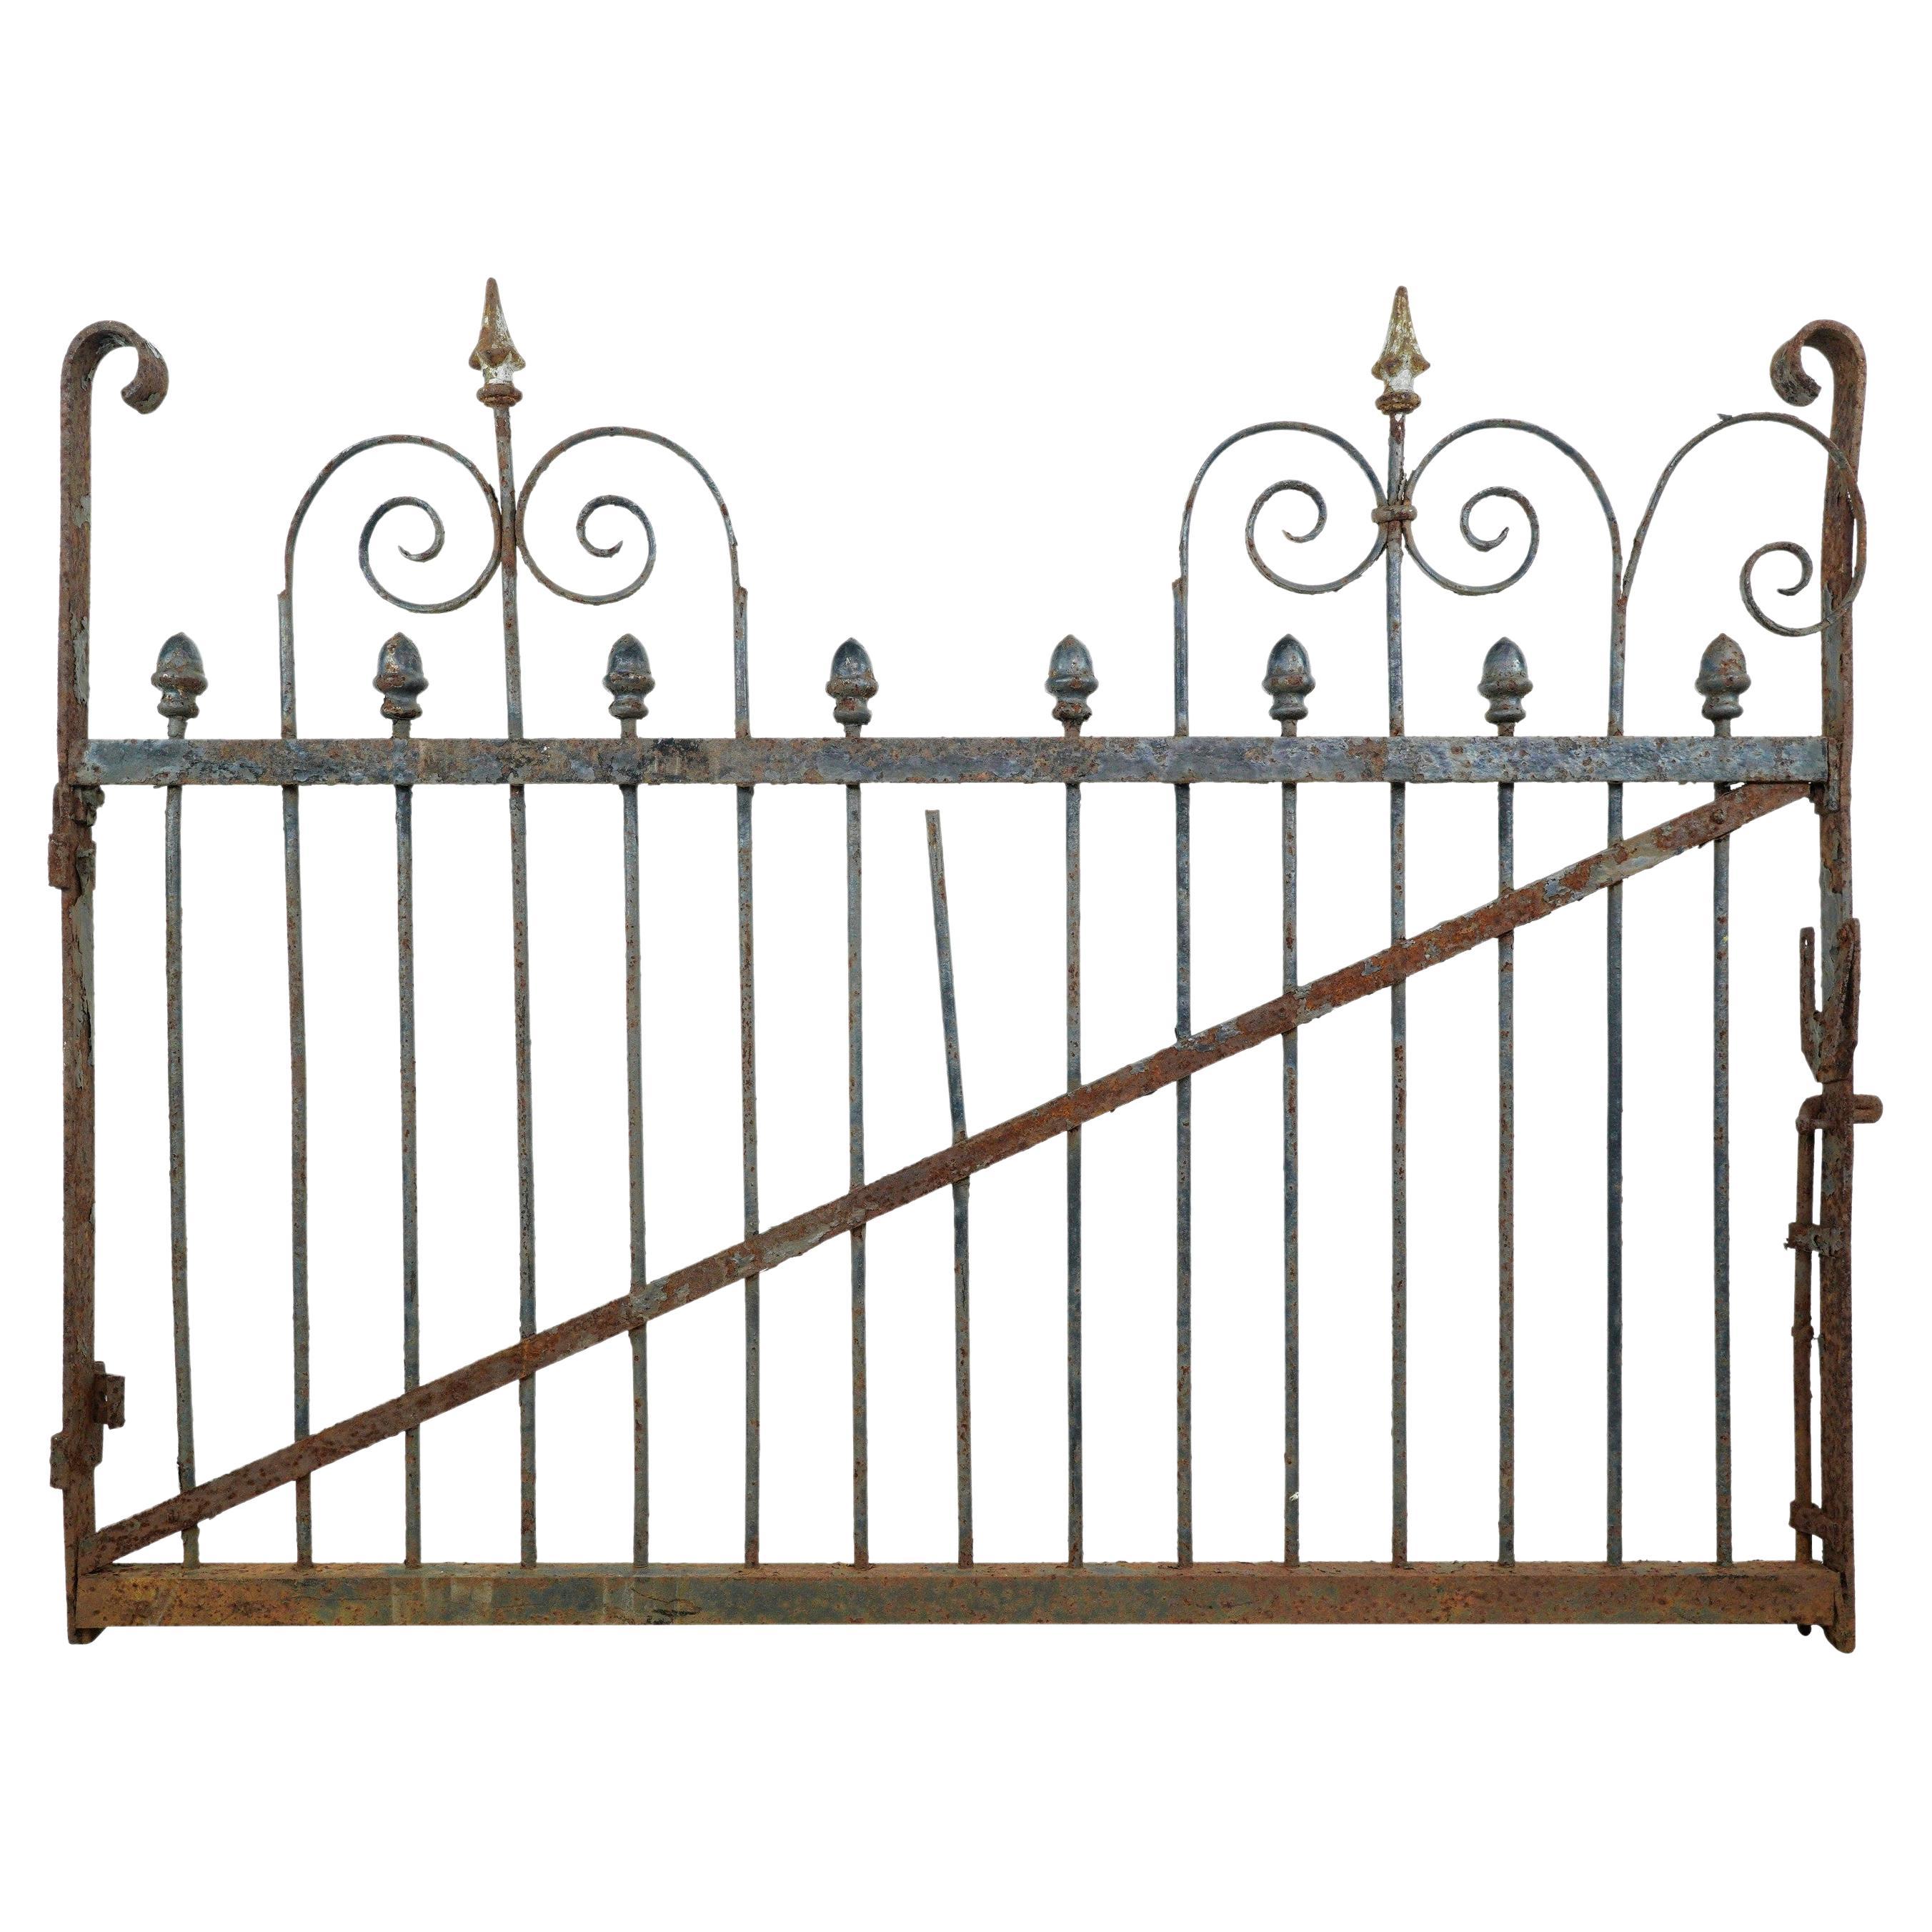 Curled Bars Wrought Iron 53 in. Privacy Yard Gate For Sale